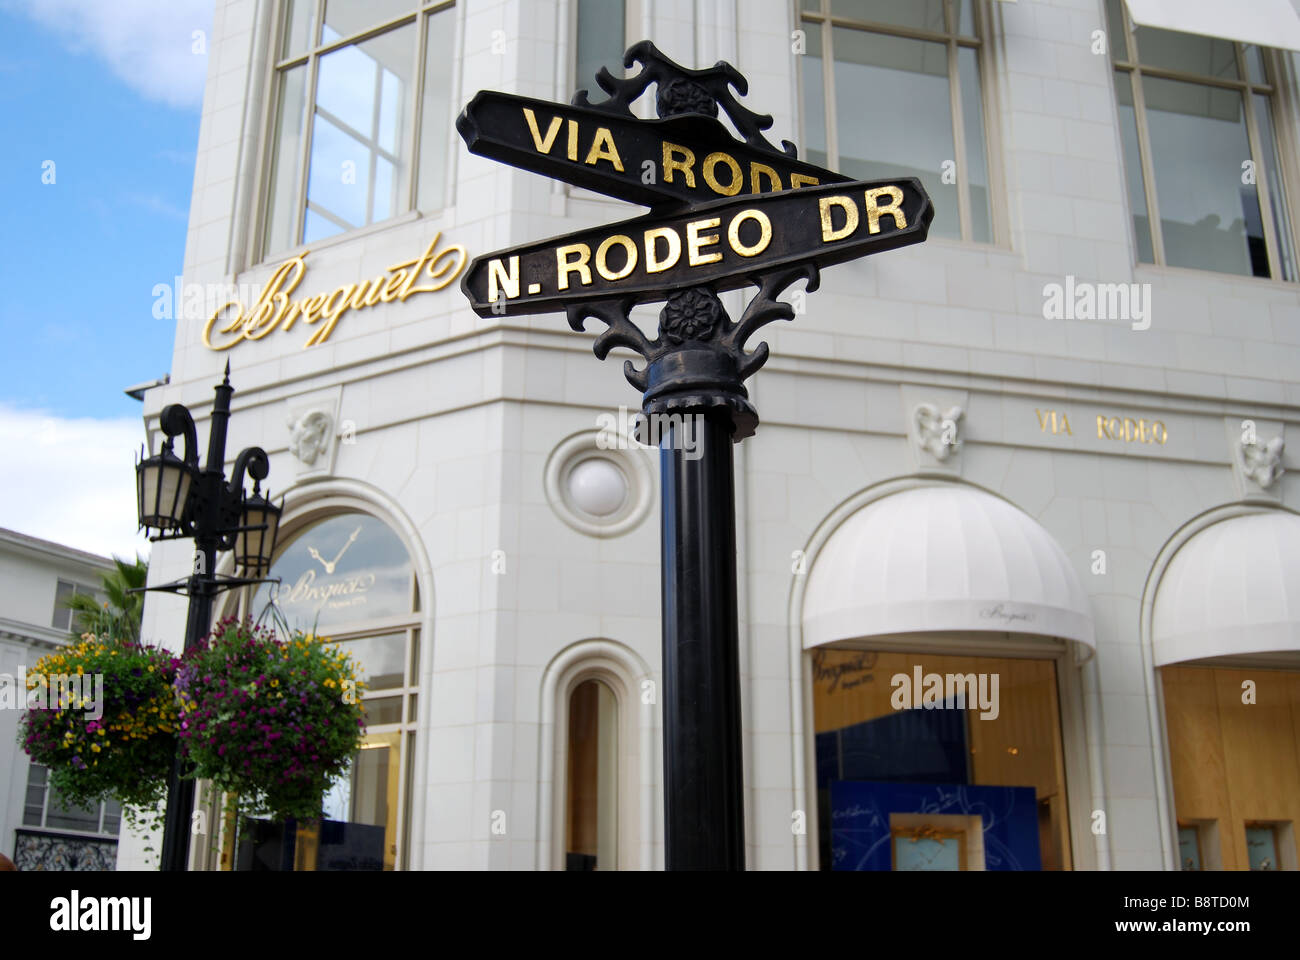 Street sign, N.Rodeo Drive, Beverly Hills, Los Angeles, California, United States of America Stock Photo